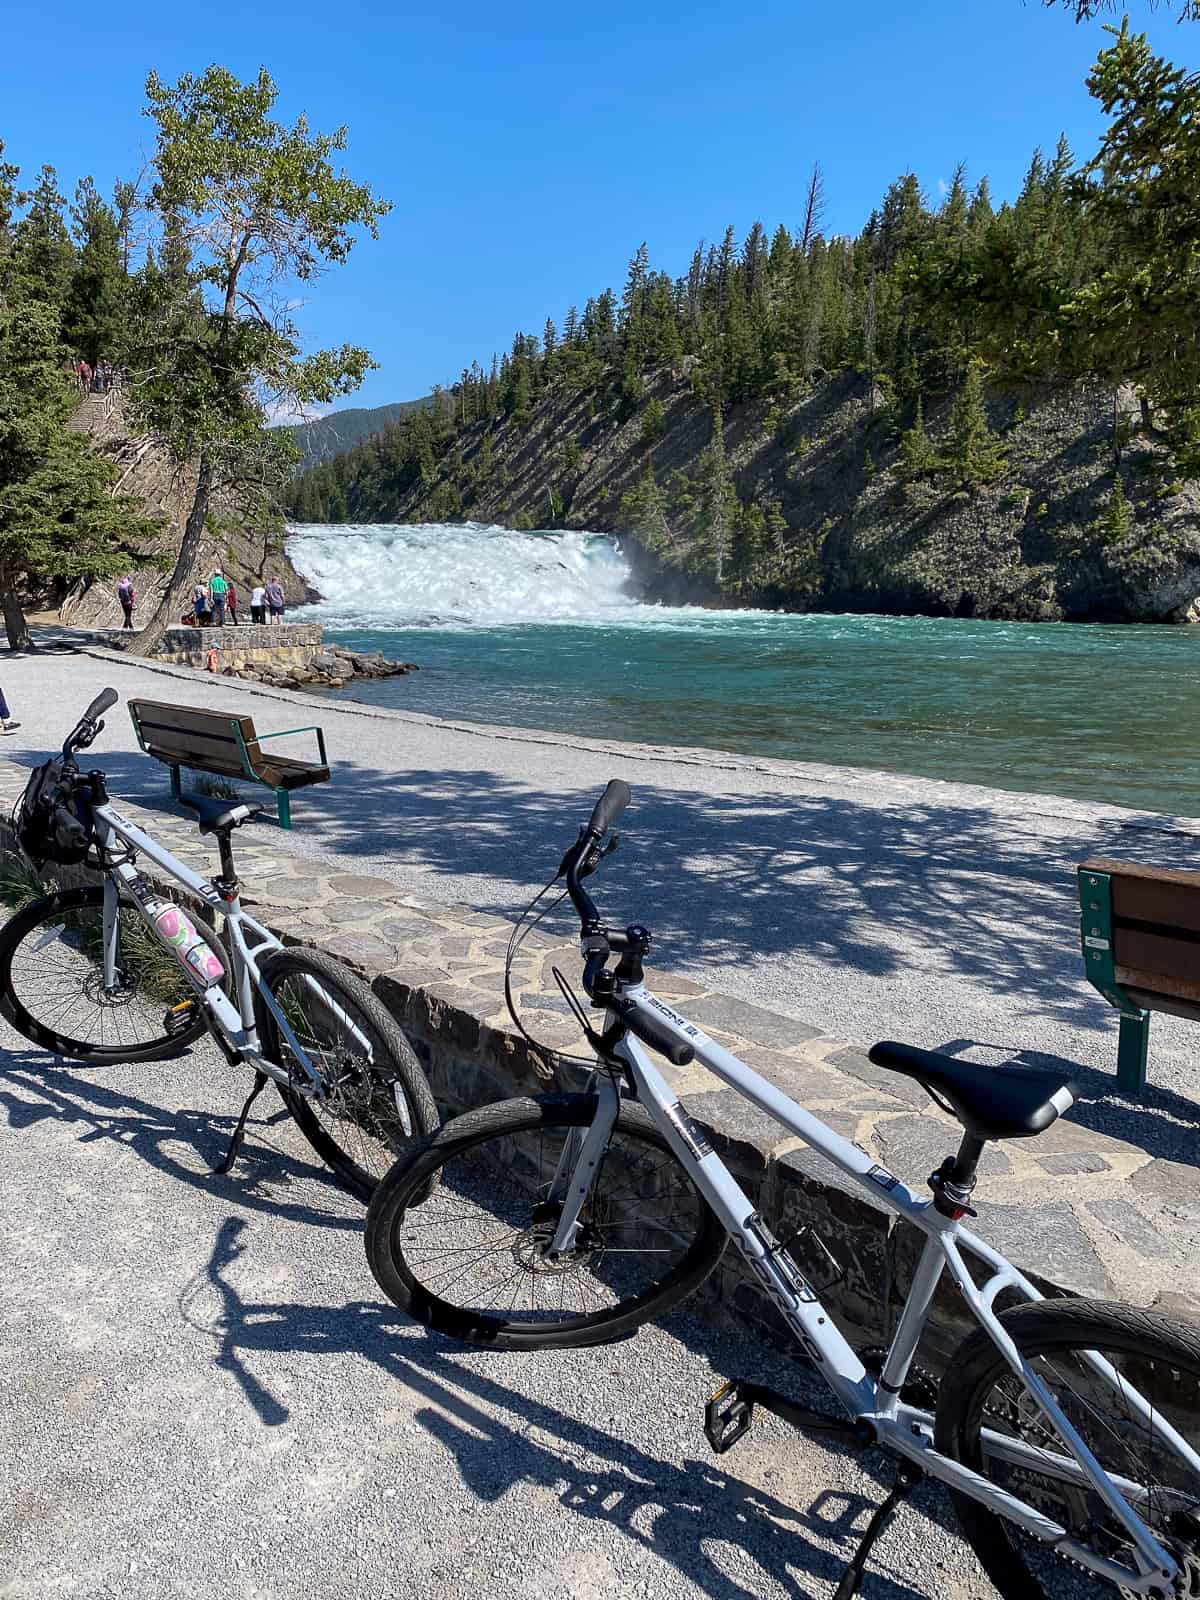 Our bikes parked beside the Bow River.